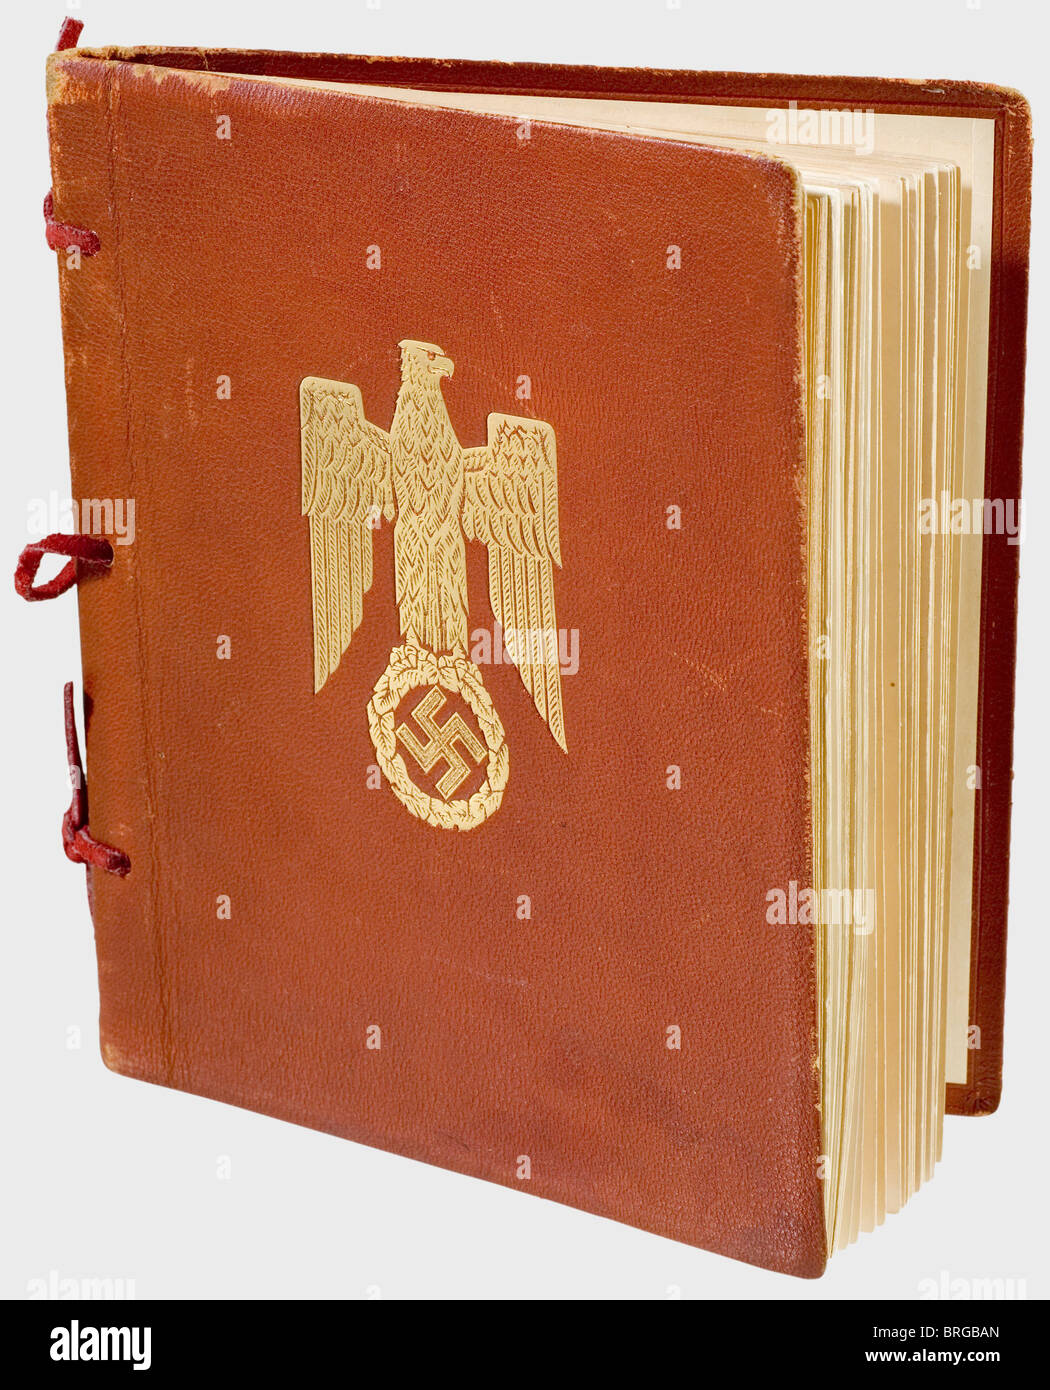 Gauleiter Adolf Wagner,a presentation picture book for delegation members on the occasion of Benito Mussolini's visit 'München,die Hauptstadt der Bewegung grüßt Benito Mussolini'(Munich,the Captial of the Movement Welcomes Benito Mussolini)with a card pasted on the flyleaf,'The Gauleiter and State's Minister Adolf Wagner is honoured to present this work produced in the movement's capital on the occasion of the visit by the Head of the Italian government,Benito Mussolini.Munich,September 1937'(transl.).Luxurious presentation volume in German and Itali,Additional-Rights-Clearences-Not Available Stock Photo